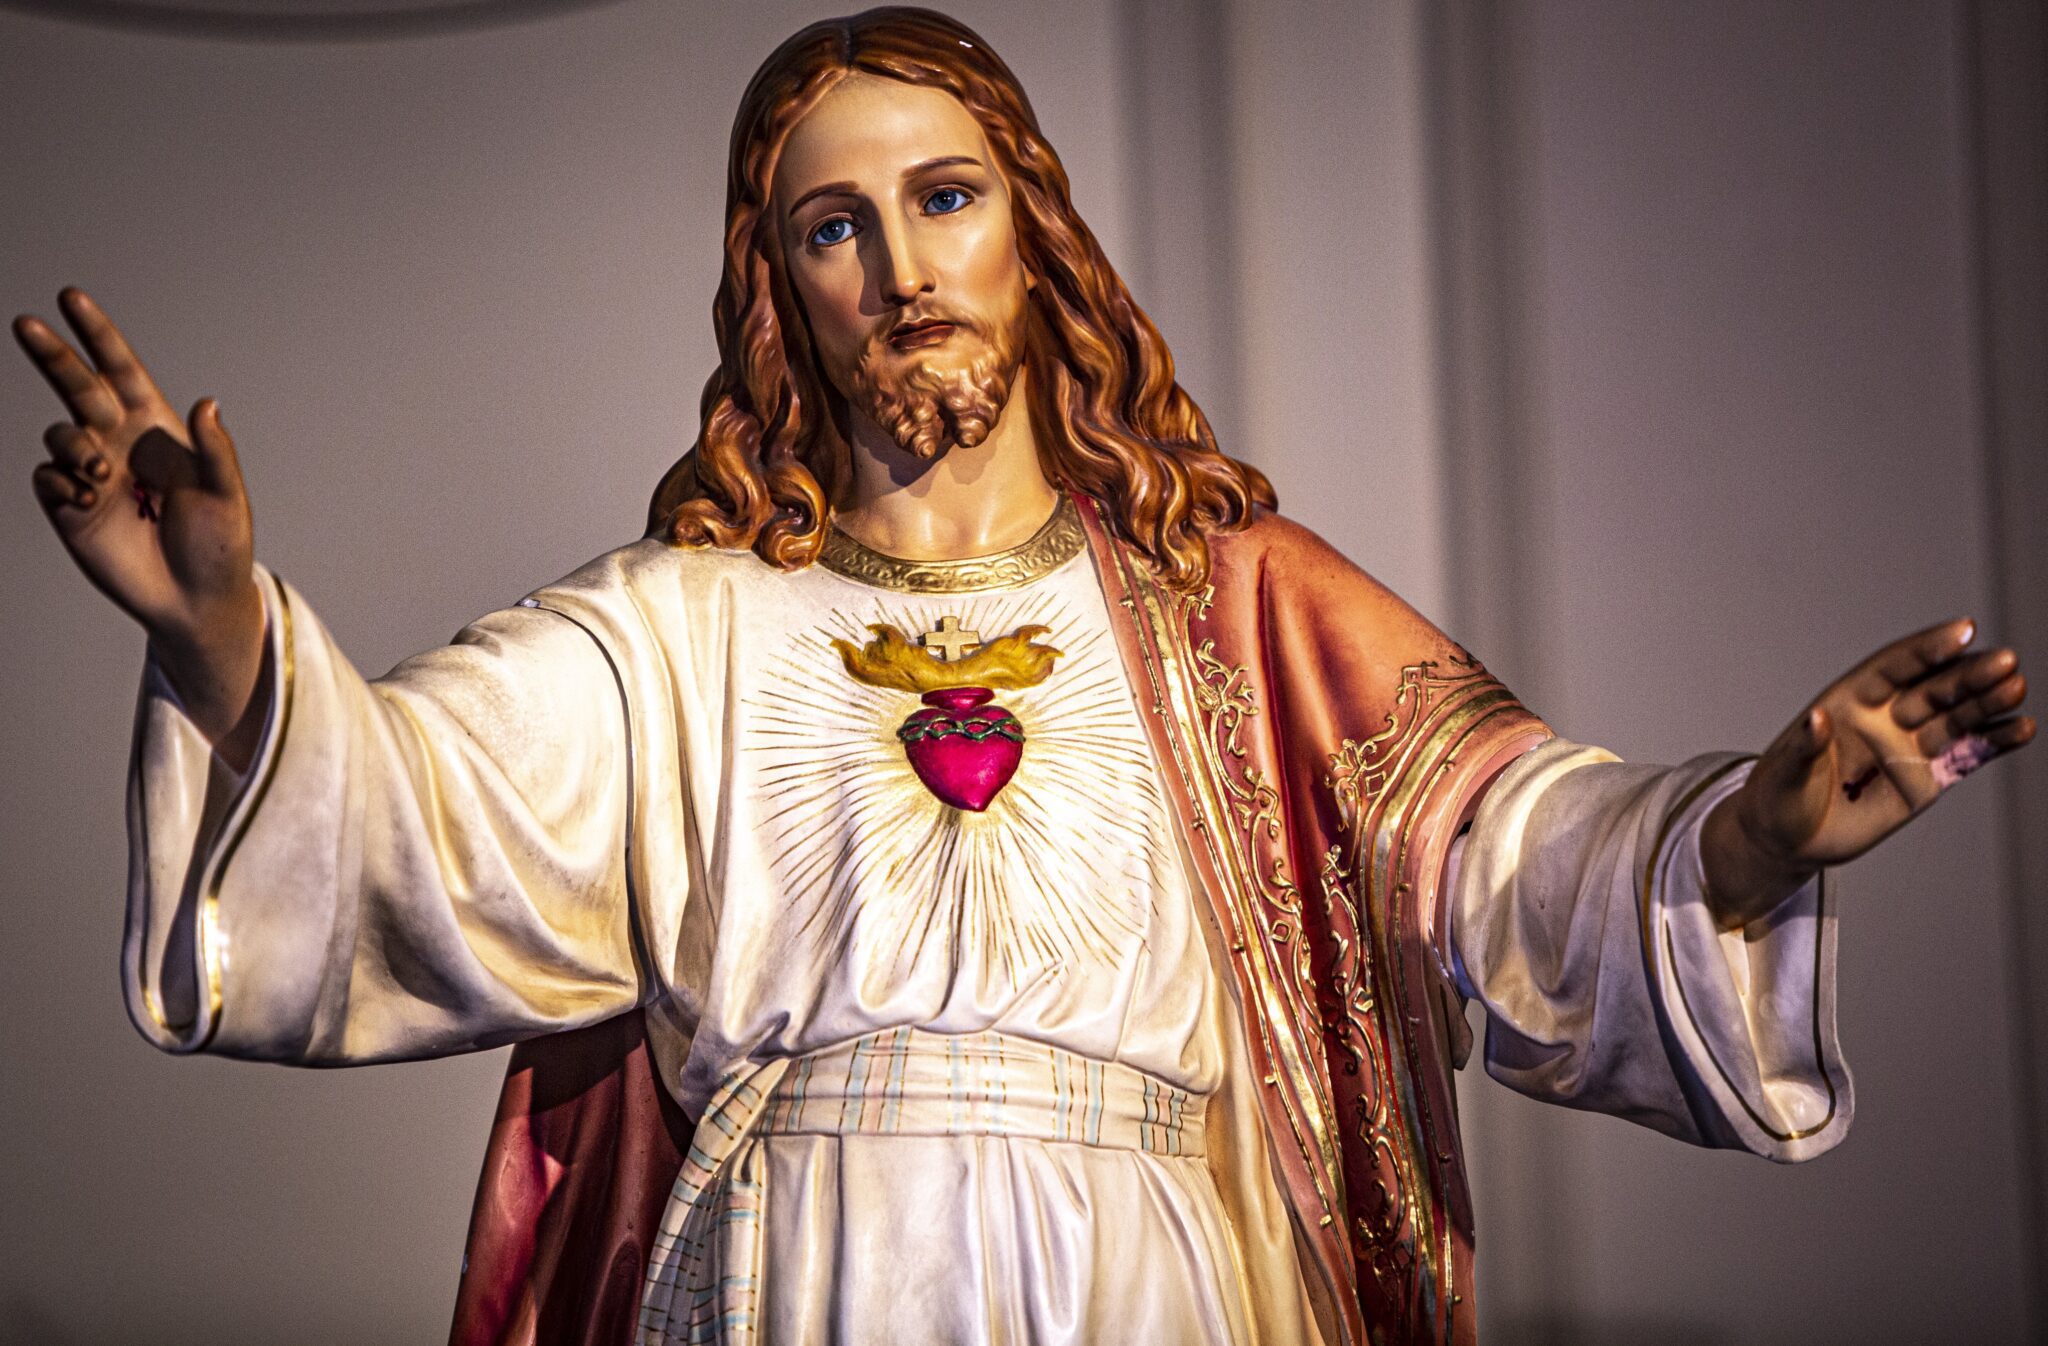 Litany to the Sacred Heart of Jesus – Praying with Jesus